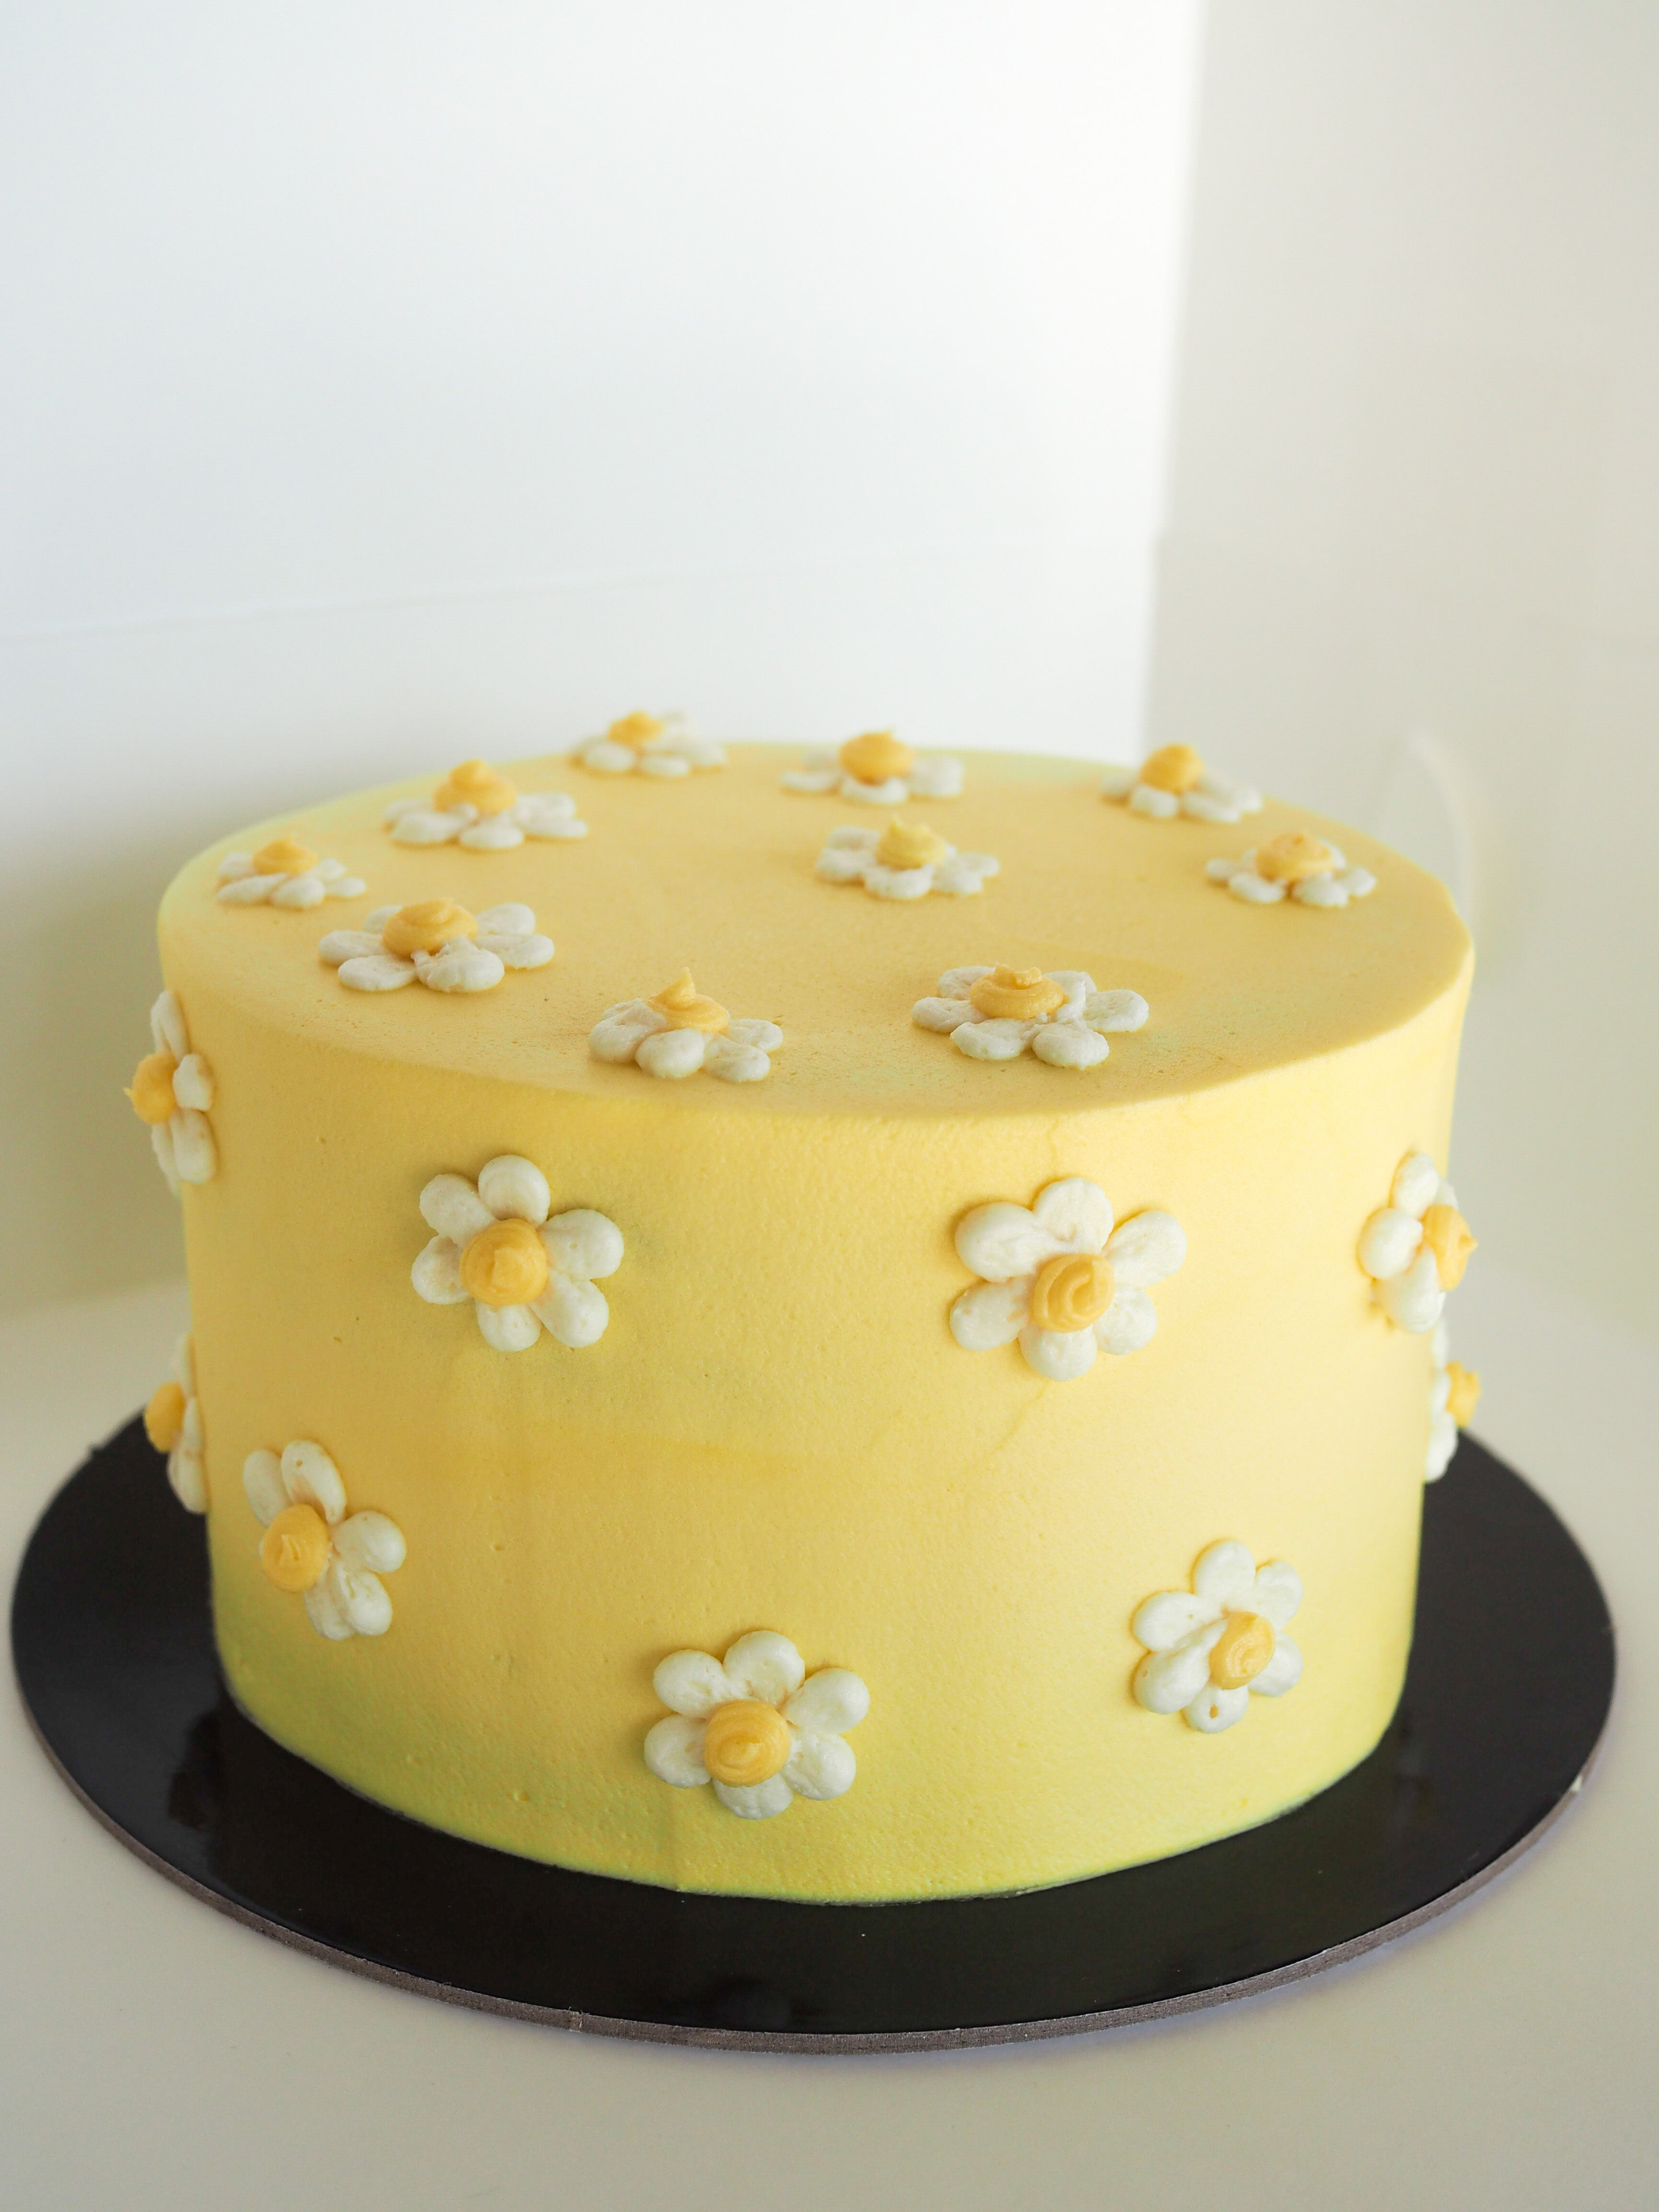 Daisy Cake – Eat With Etiquette